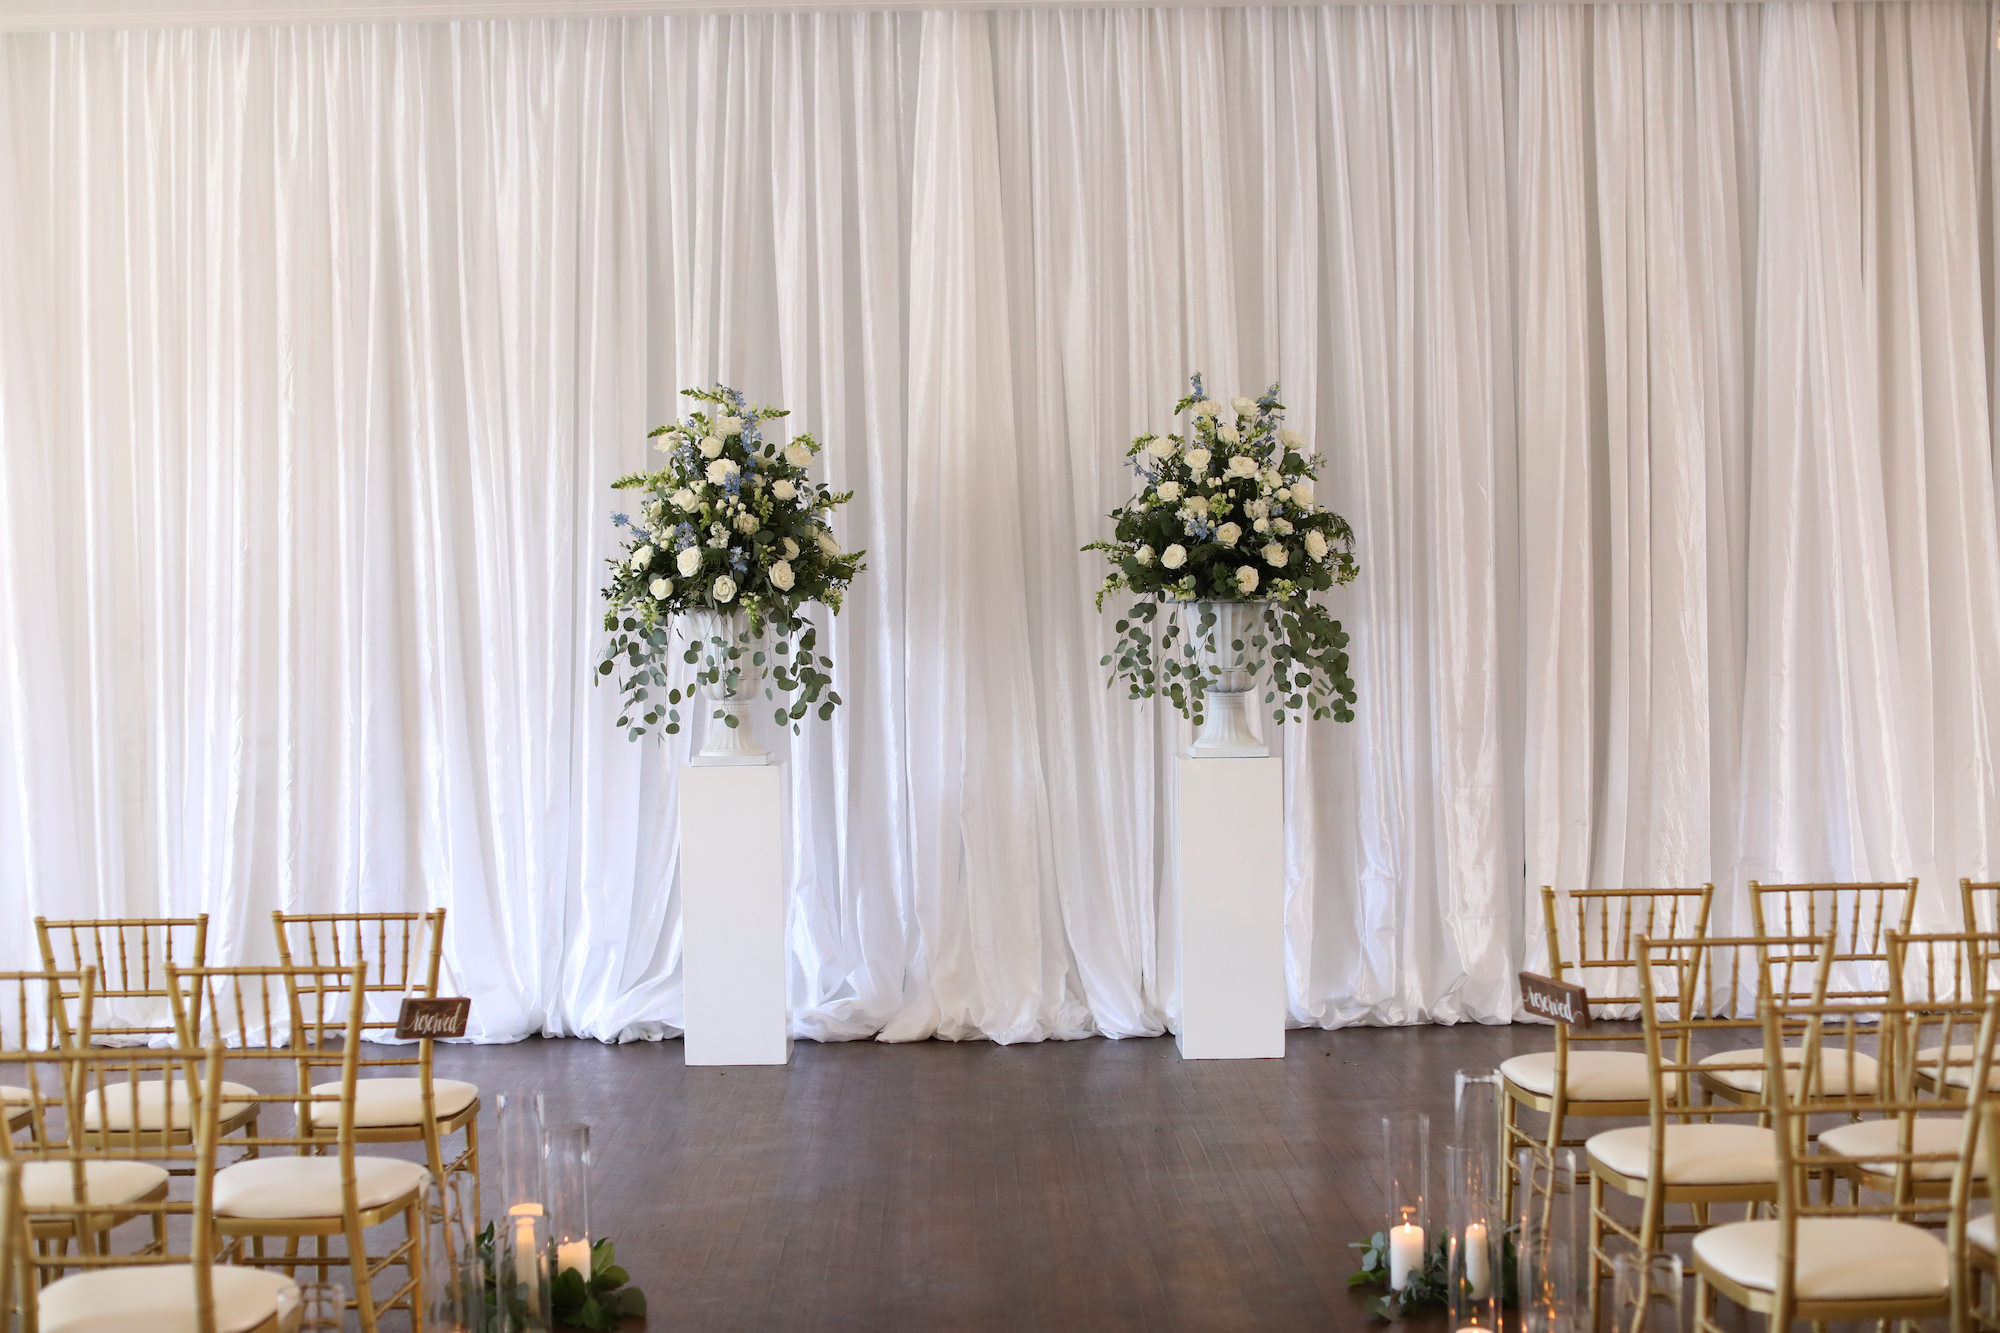 White Pillars with Roses and Blue Wildflower Altar Inspiration | Drapery Backdrop for Indoor Wedding Ceremony | Tampa Bay Venue The Orlo